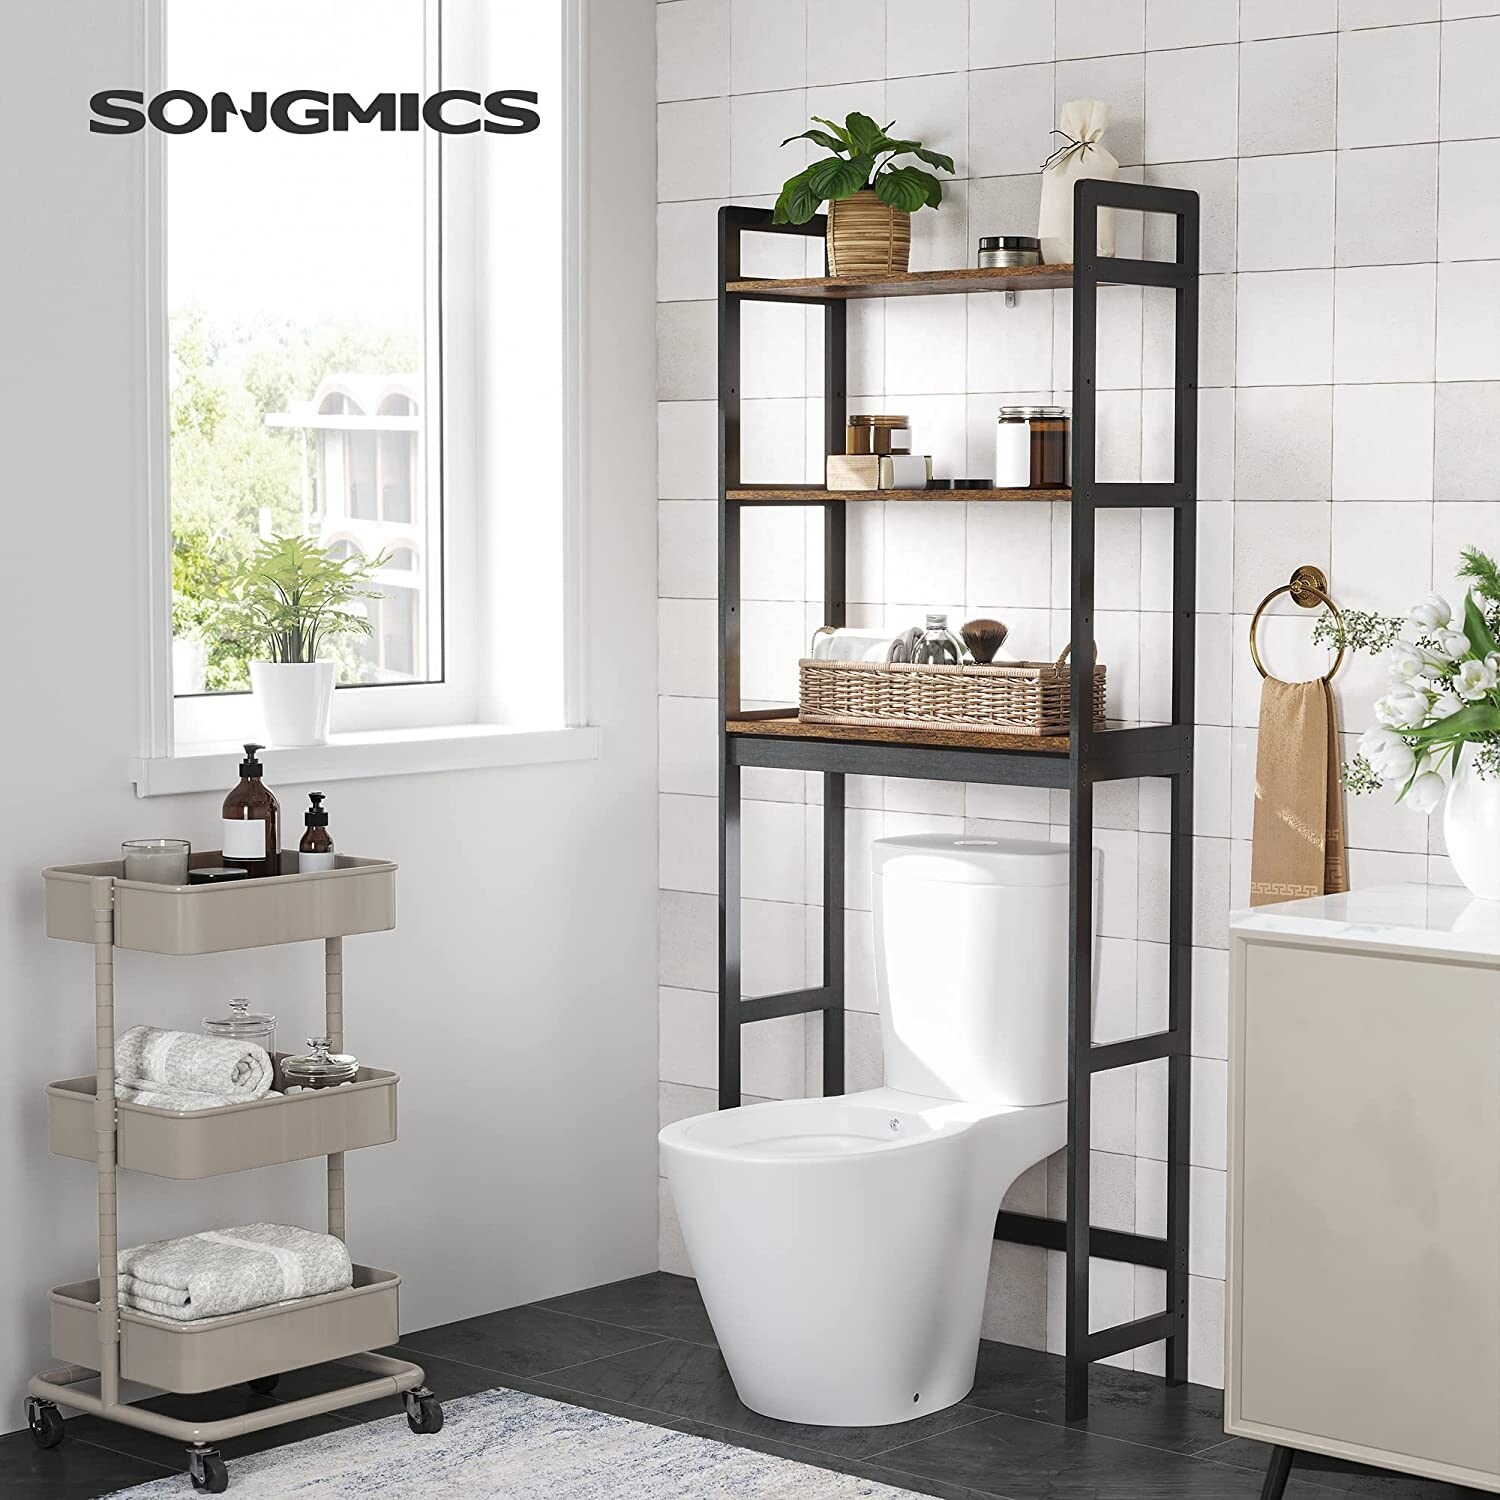 https://ak1.ostkcdn.com/images/products/is/images/direct/f30c09204d41adbe1c5ab0f9ff4666956c449c55/Over-The-Toilet-Storage-Shelves.jpg